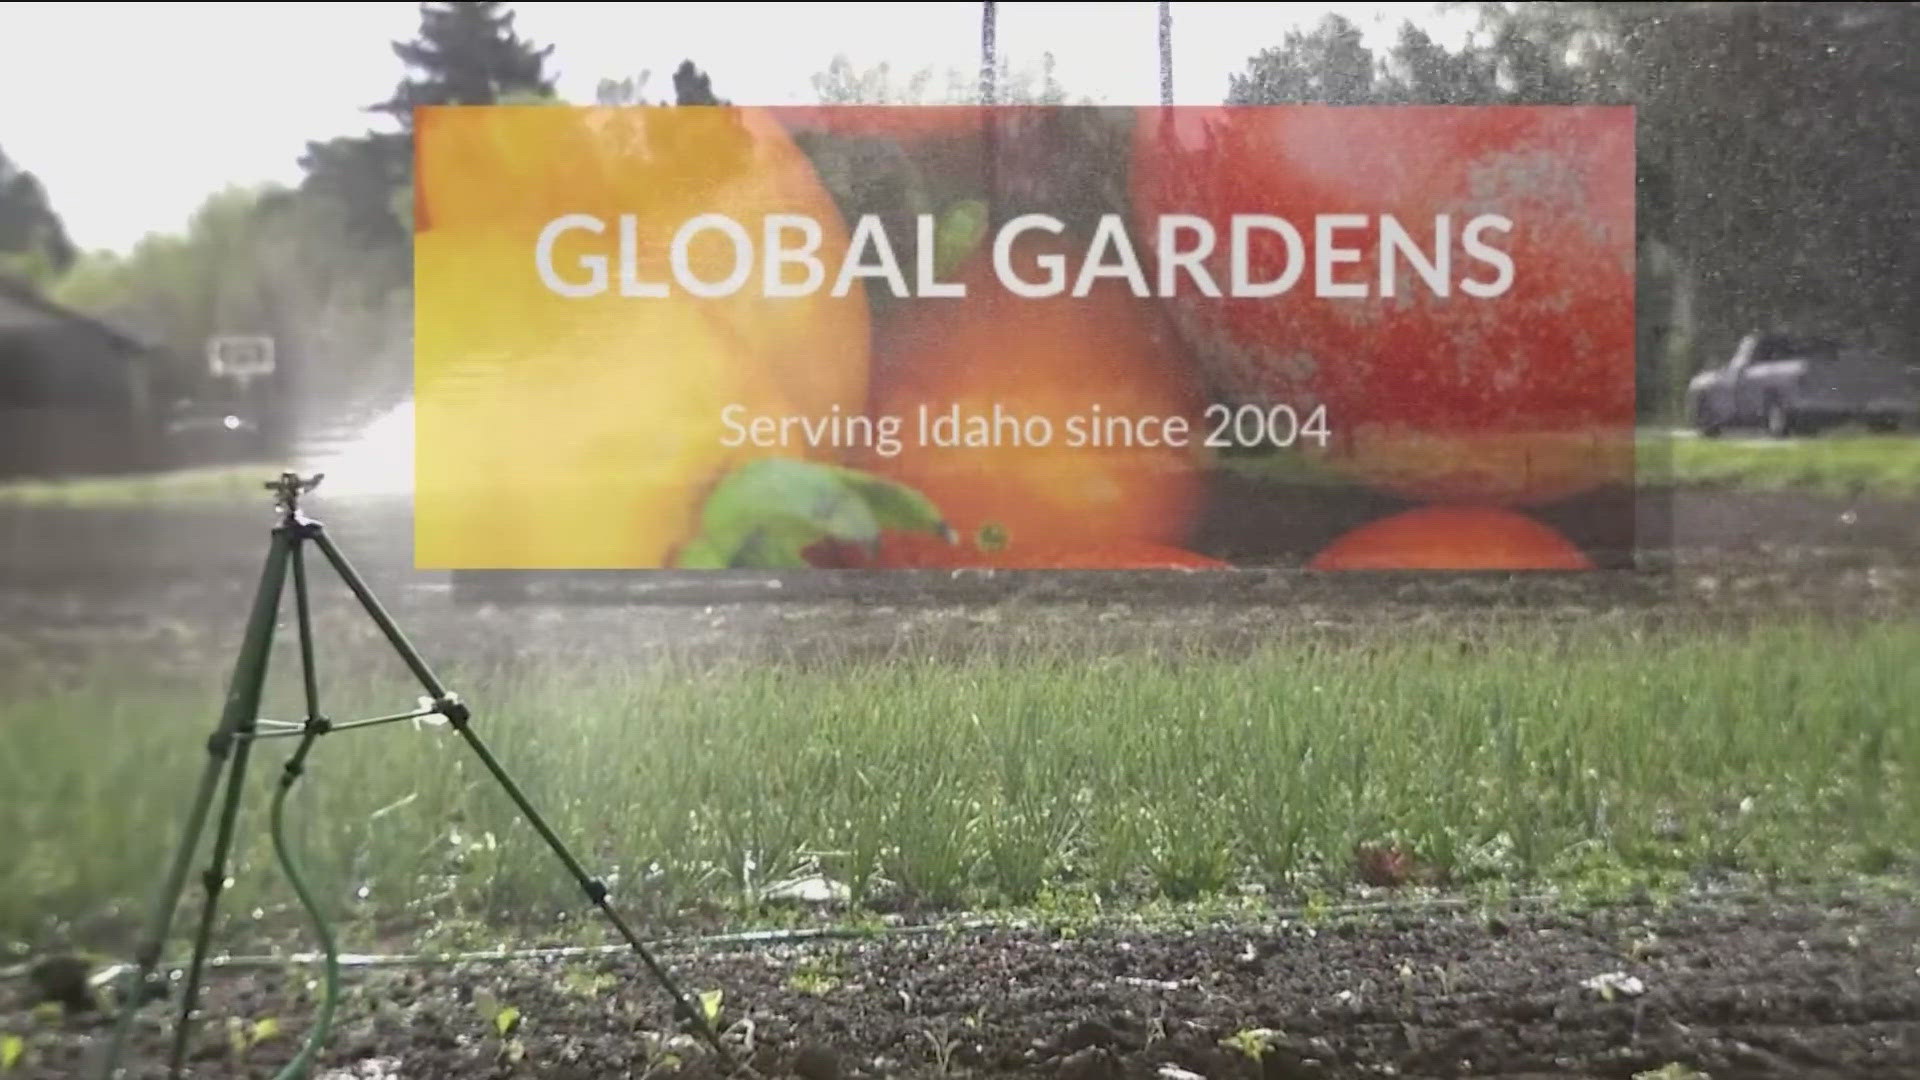 Global Gardens is joining the annual online donation campaign that provides a way to connect with more than 600 Idaho nonprofits.